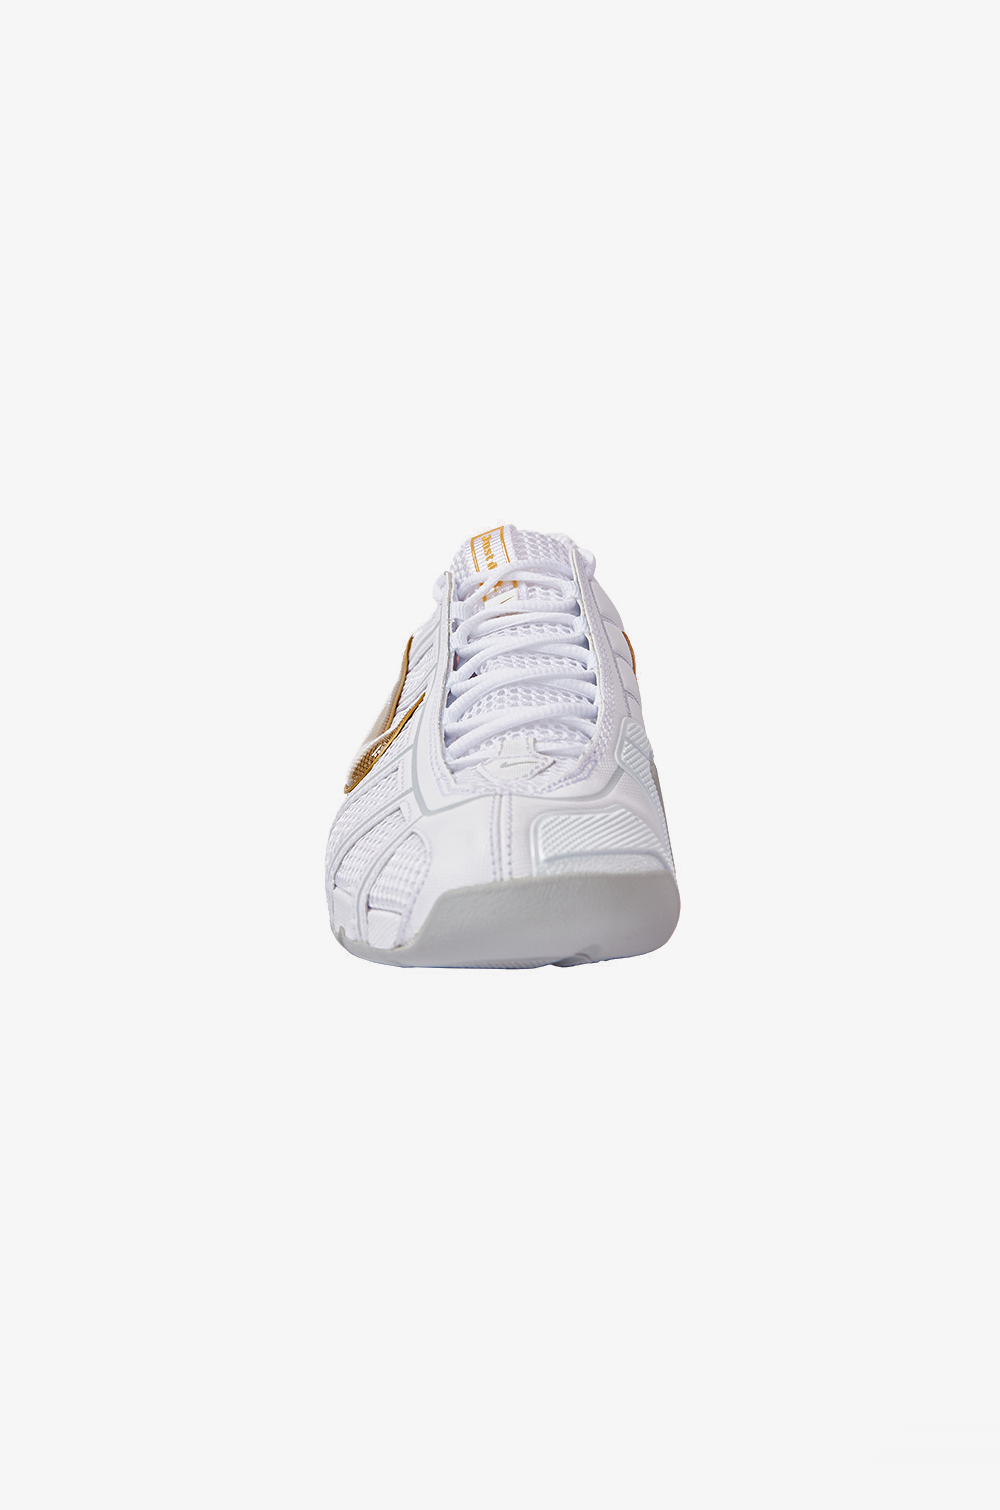 Nike Air Zoom Fencer Gold